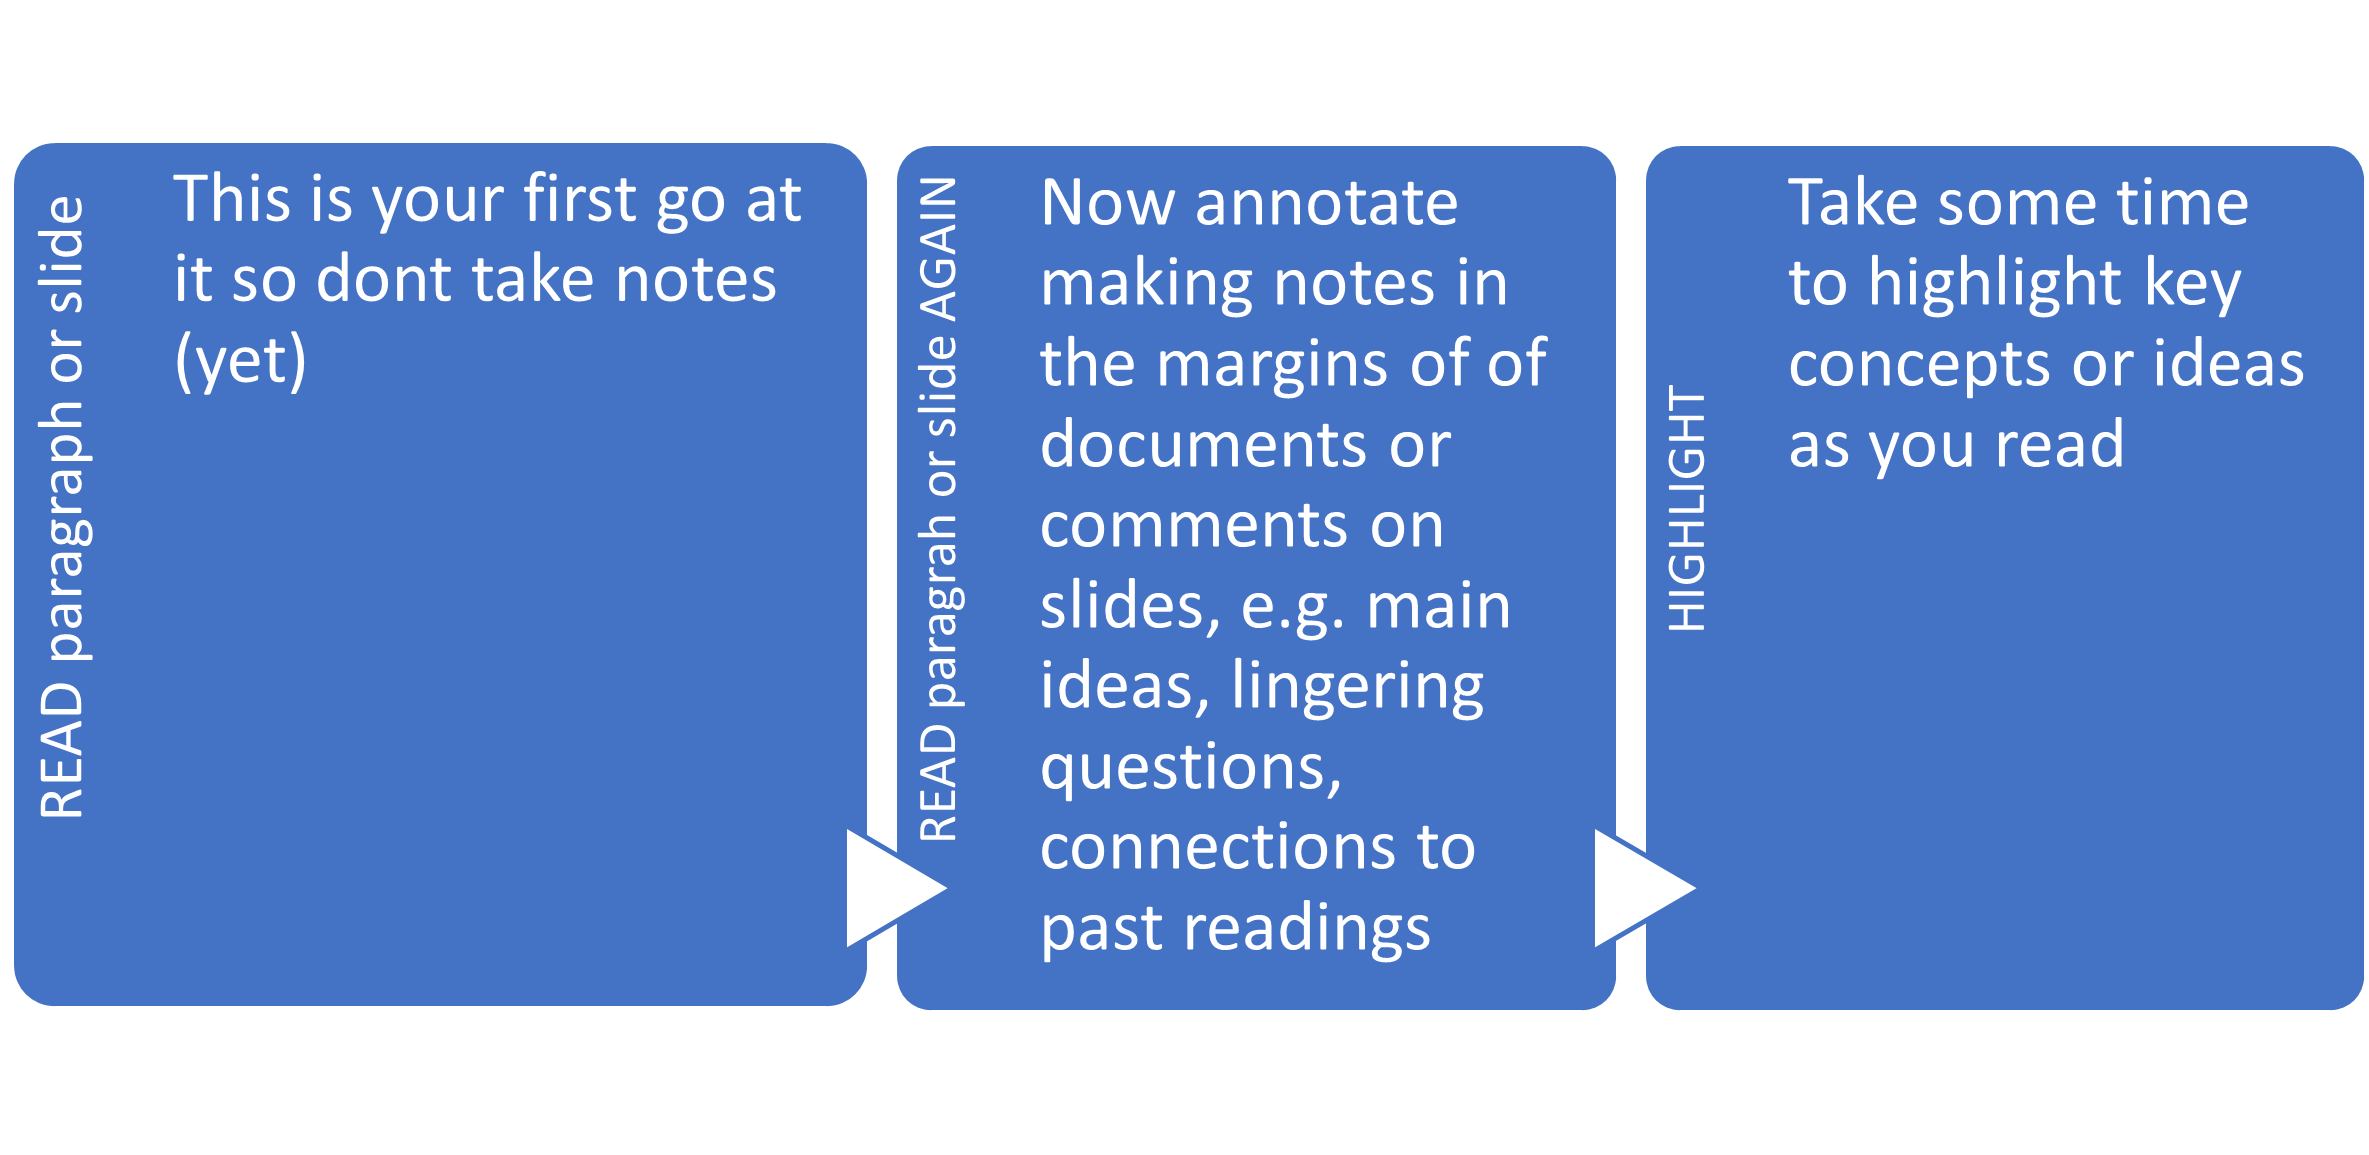 Figure 2. This picture shows a 3-step strategy for effective note taking,. First, it is recommended that you read through the text with out taking notes; then read again but this time with annotations on the margins of the documents and making your own comments or questions. Lastly, you could take some time to highlight key concepts or ideas.